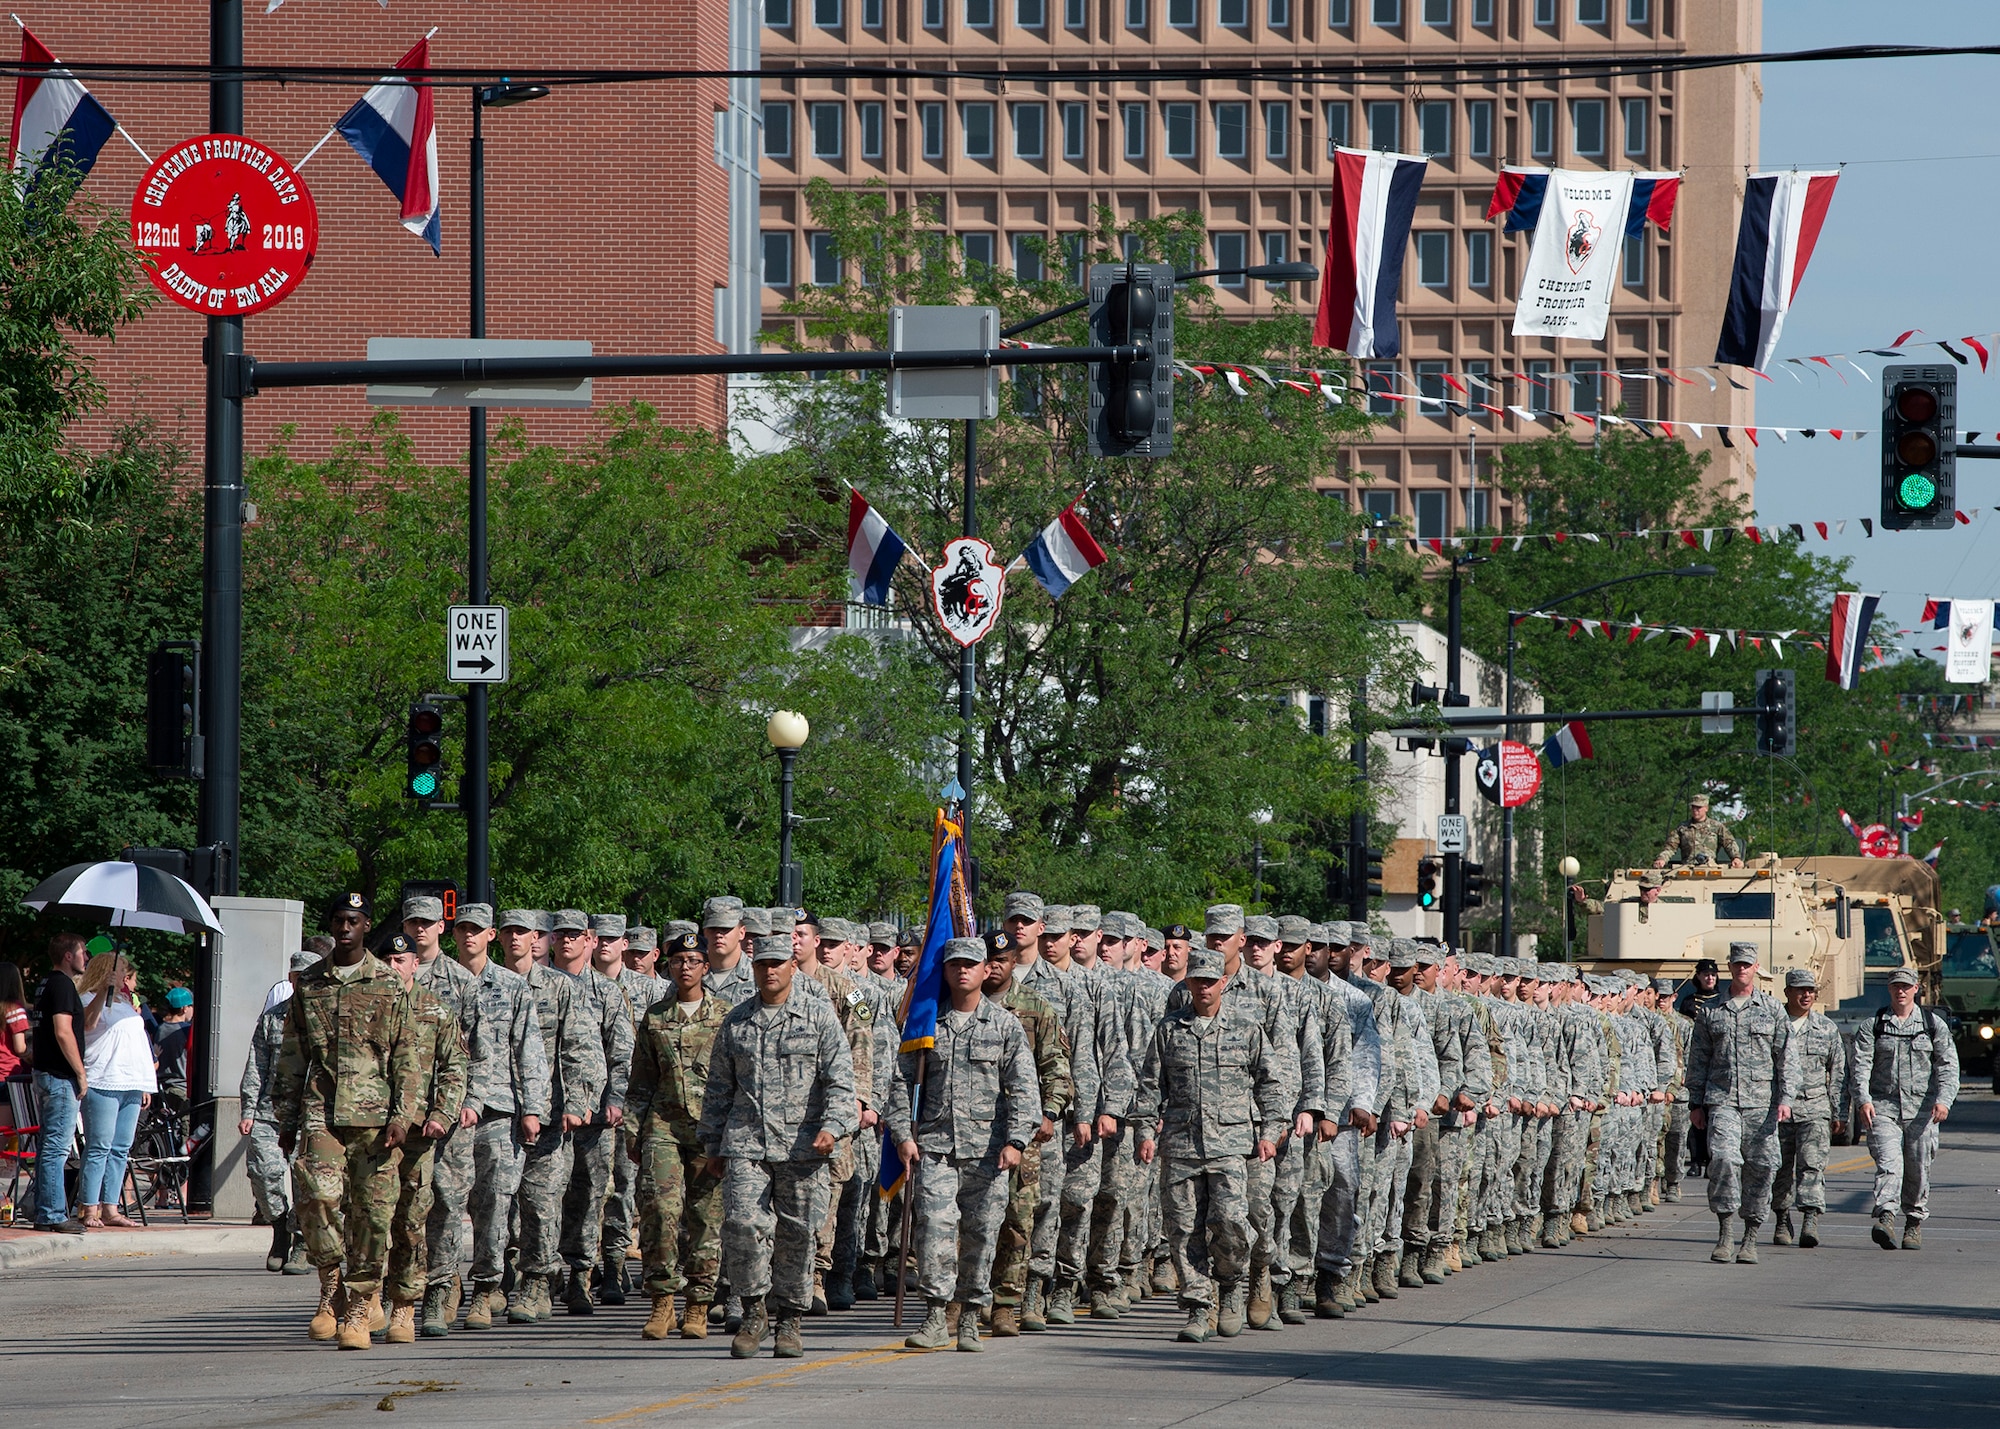 Airmen from F.E. Warren Air Force Base, Wyo., march in formation during the 122nd Cheyenne Frontier Days opening Grand Parade in Cheyenne, Wyo., July 21, 2018. Service members from multiple branches took part in the parade. This year marks the 151st anniversary of F.E. Warren Air Force Base and the city of Cheyenne. The F.E. Warren Air Force Base and Cheyenne communities came together to celebrate the CFD rodeo and festival, which runs from July 20-29. (U.S. Air Force photo by Tech Sgt. Christopher Ruano)